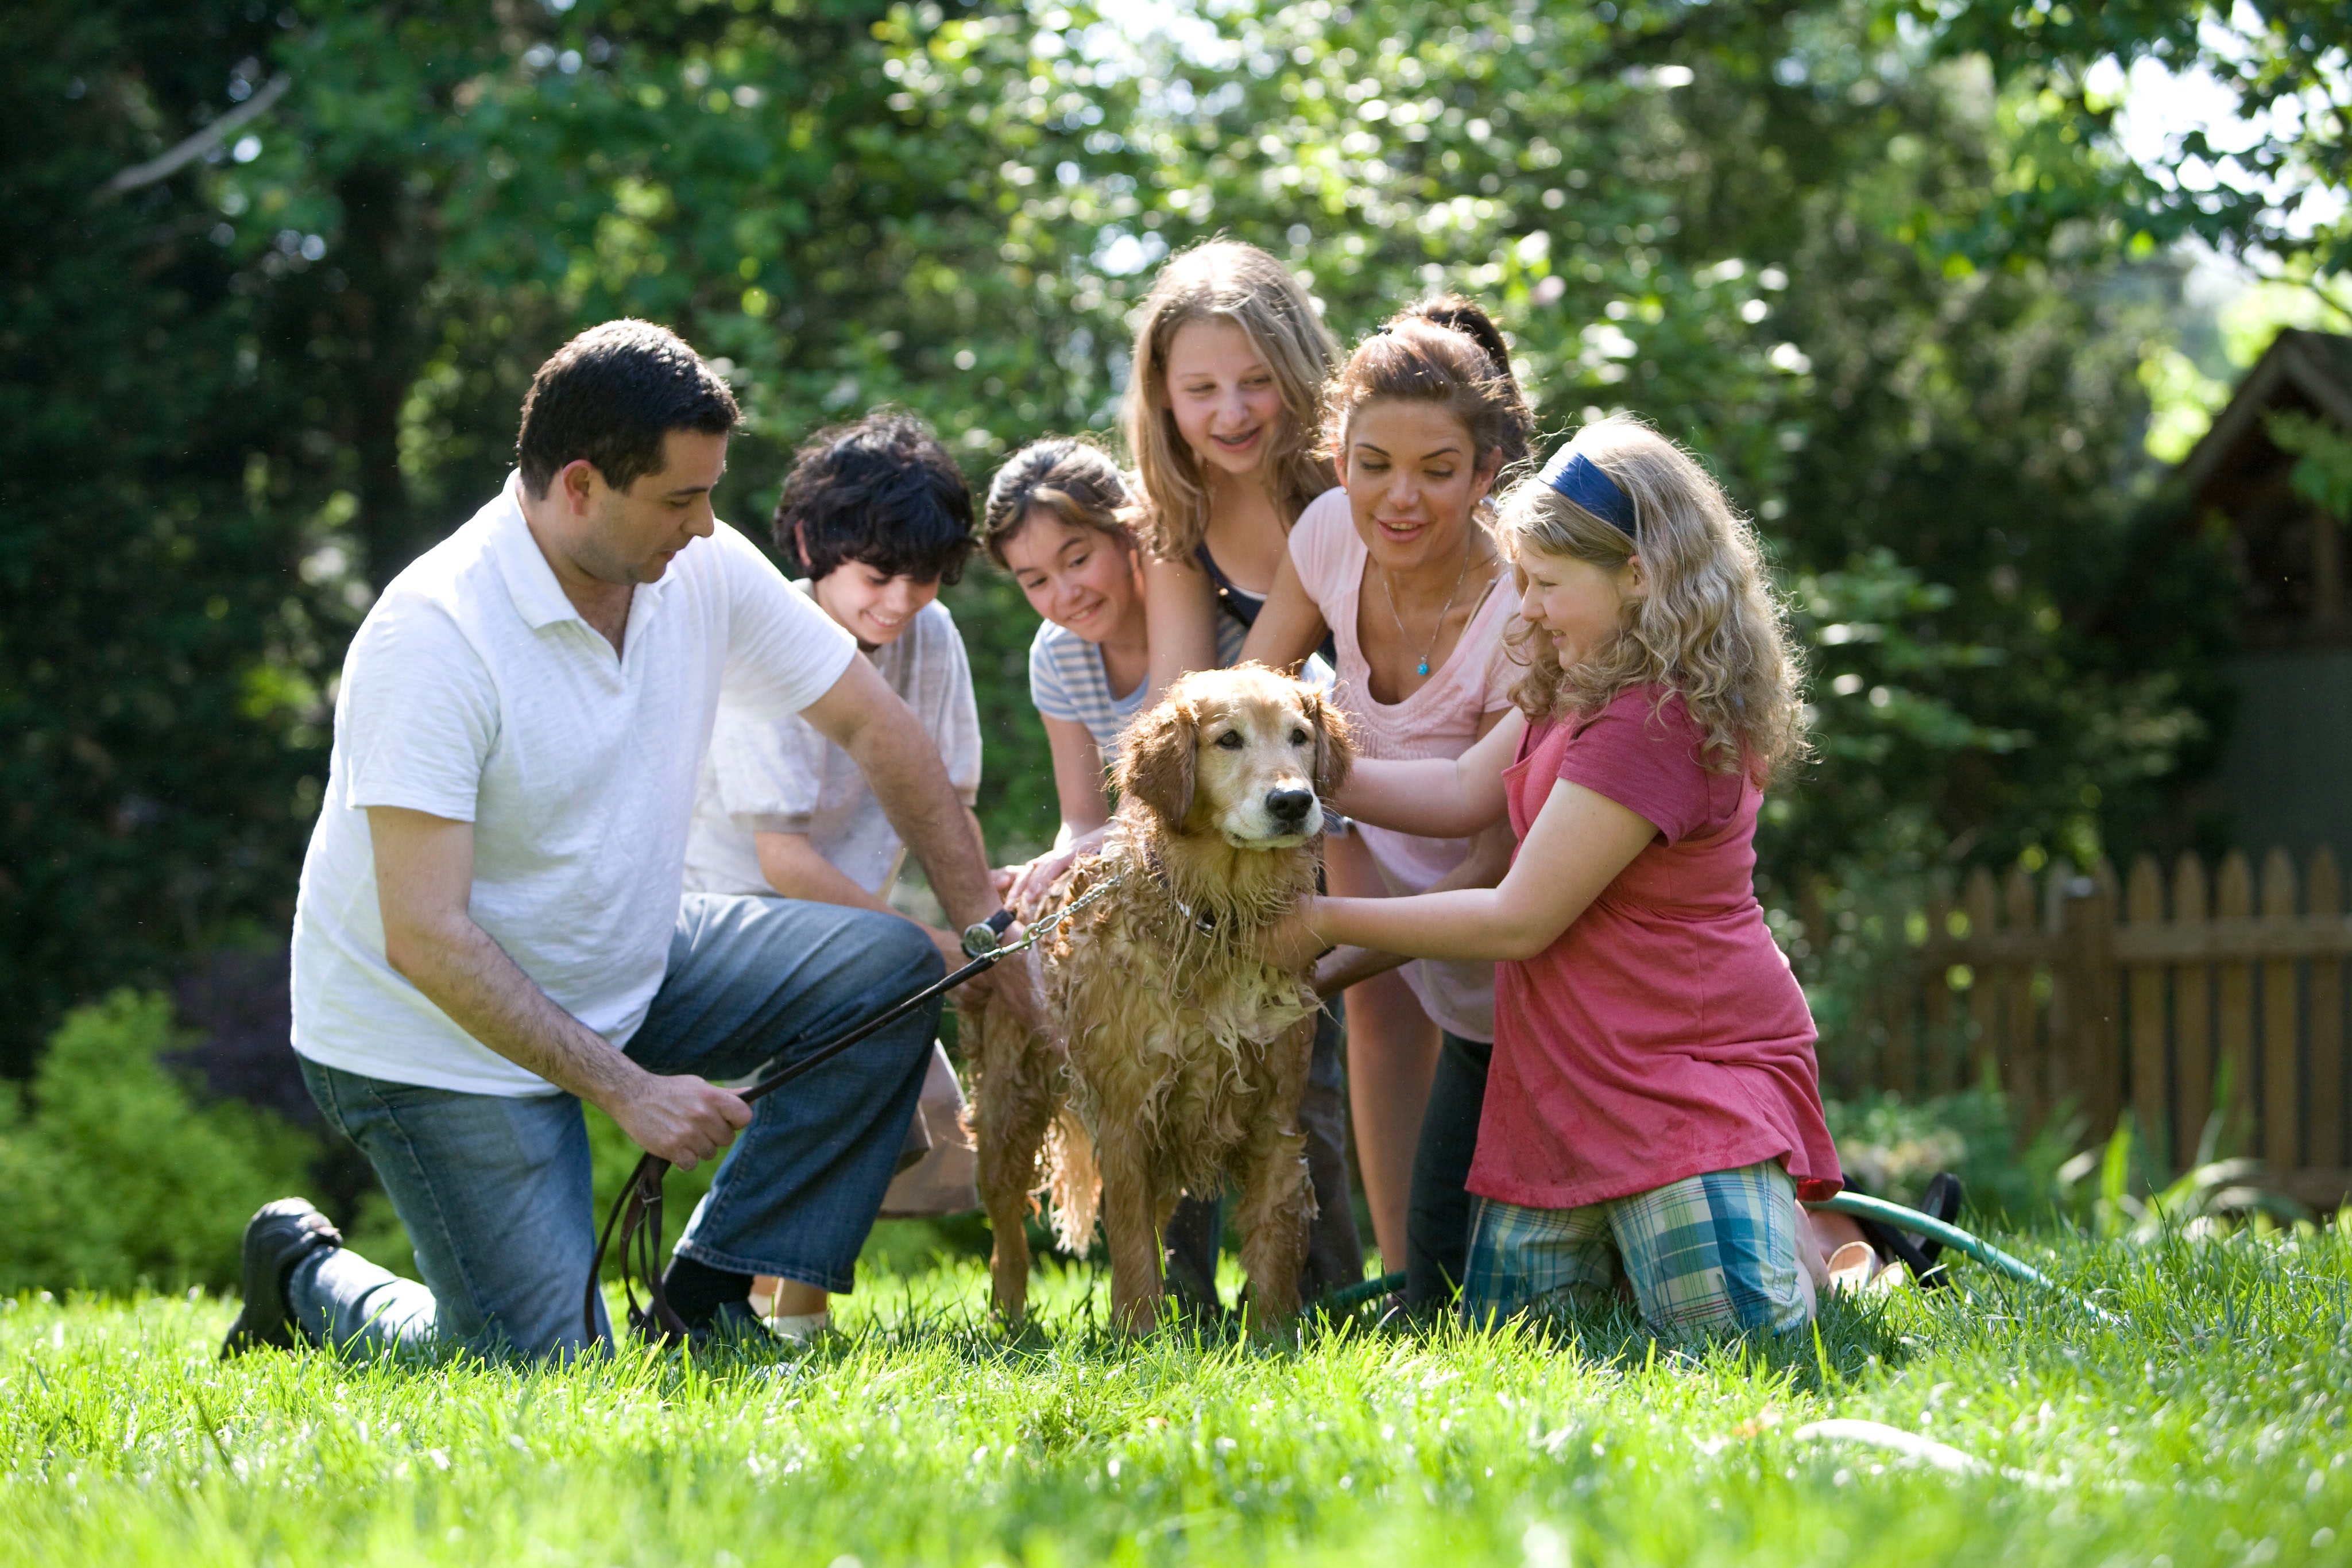 A family that deserves the protection of insurance from the David Nelson Agency gathers around their dog on a summer day